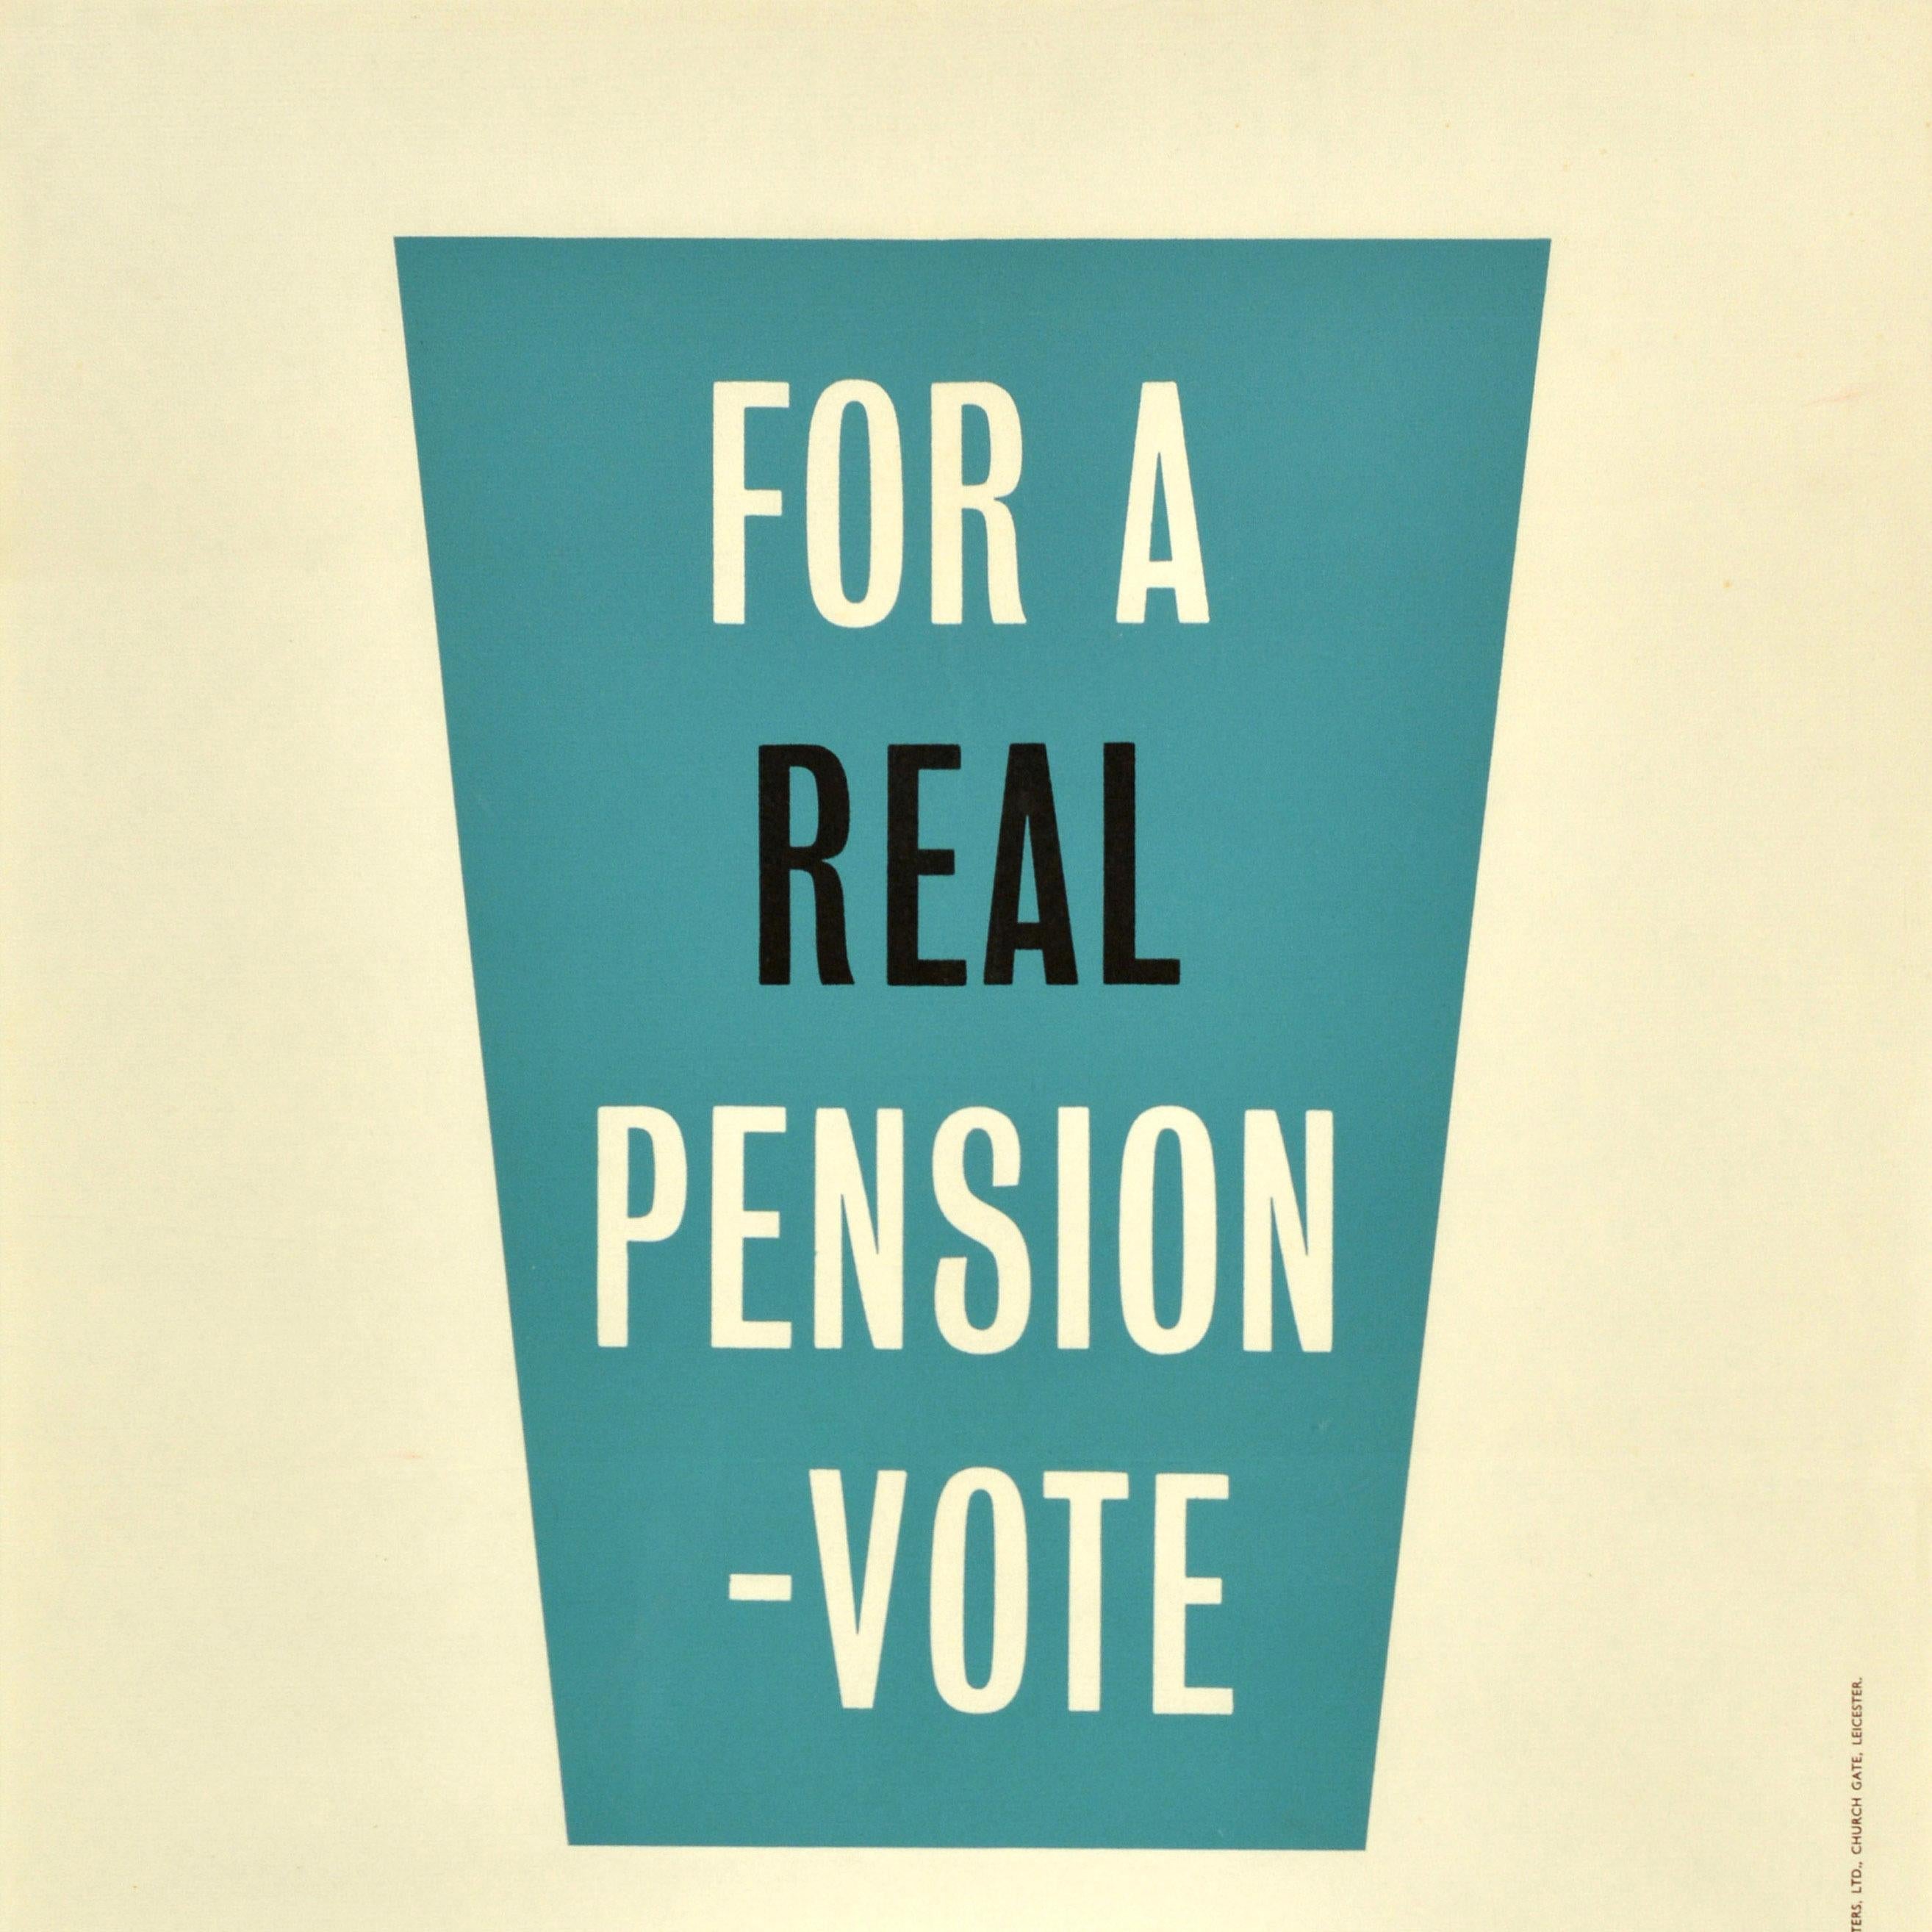 Original vintage political General Election poster issued by the Labour Party - For a Real Pension Vote Labour - featuring a dynamic design with the bold text inside an exclamation mark. Printed by Leicester Printers Ltd. Good condition, folds,